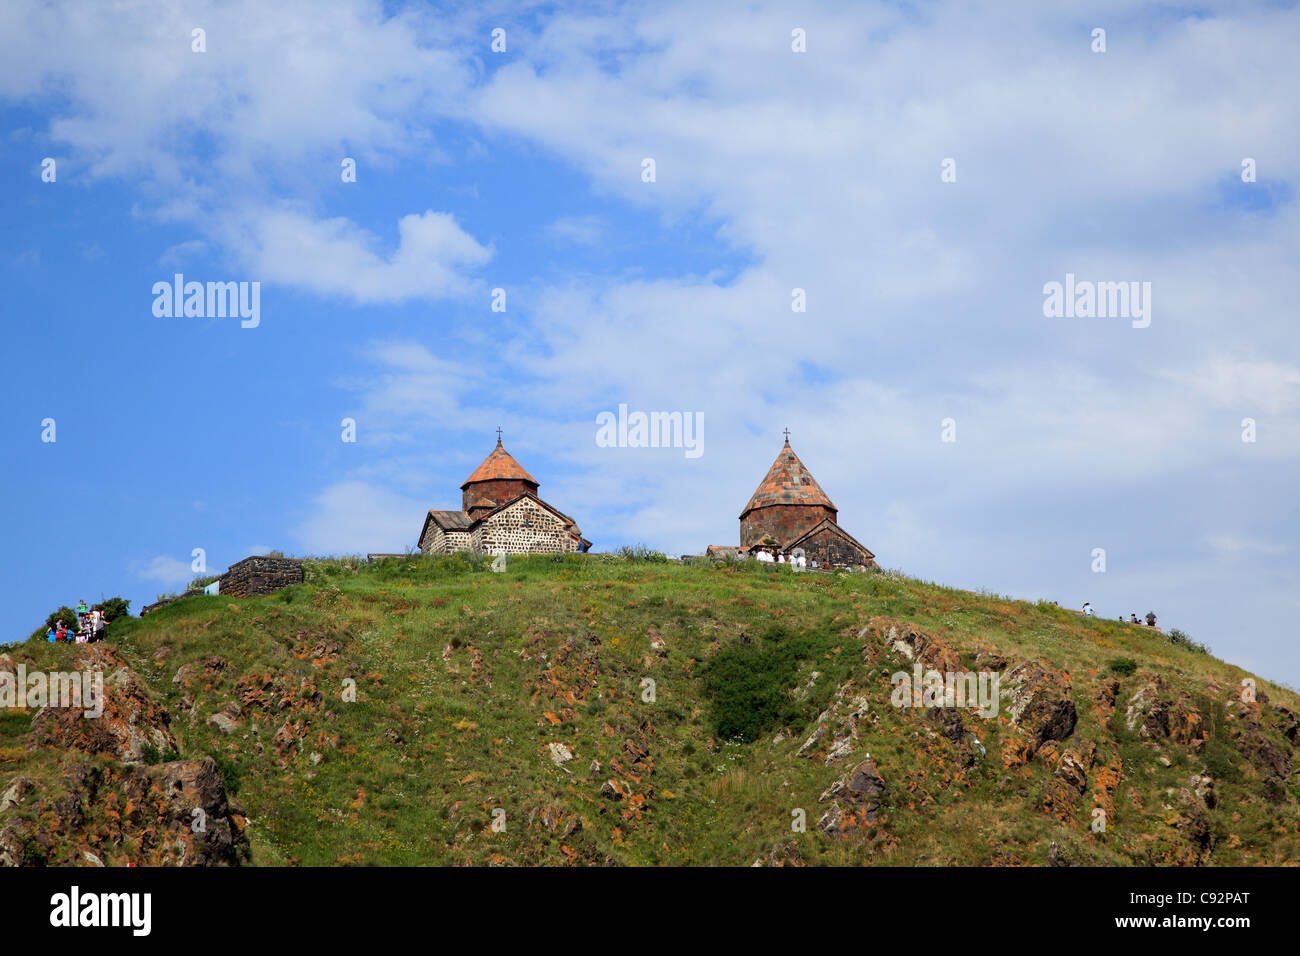 There is a large monastery on the island in Lake Sevan, founded in the 9th century, and the buildings overlook the lake. Stock Photo